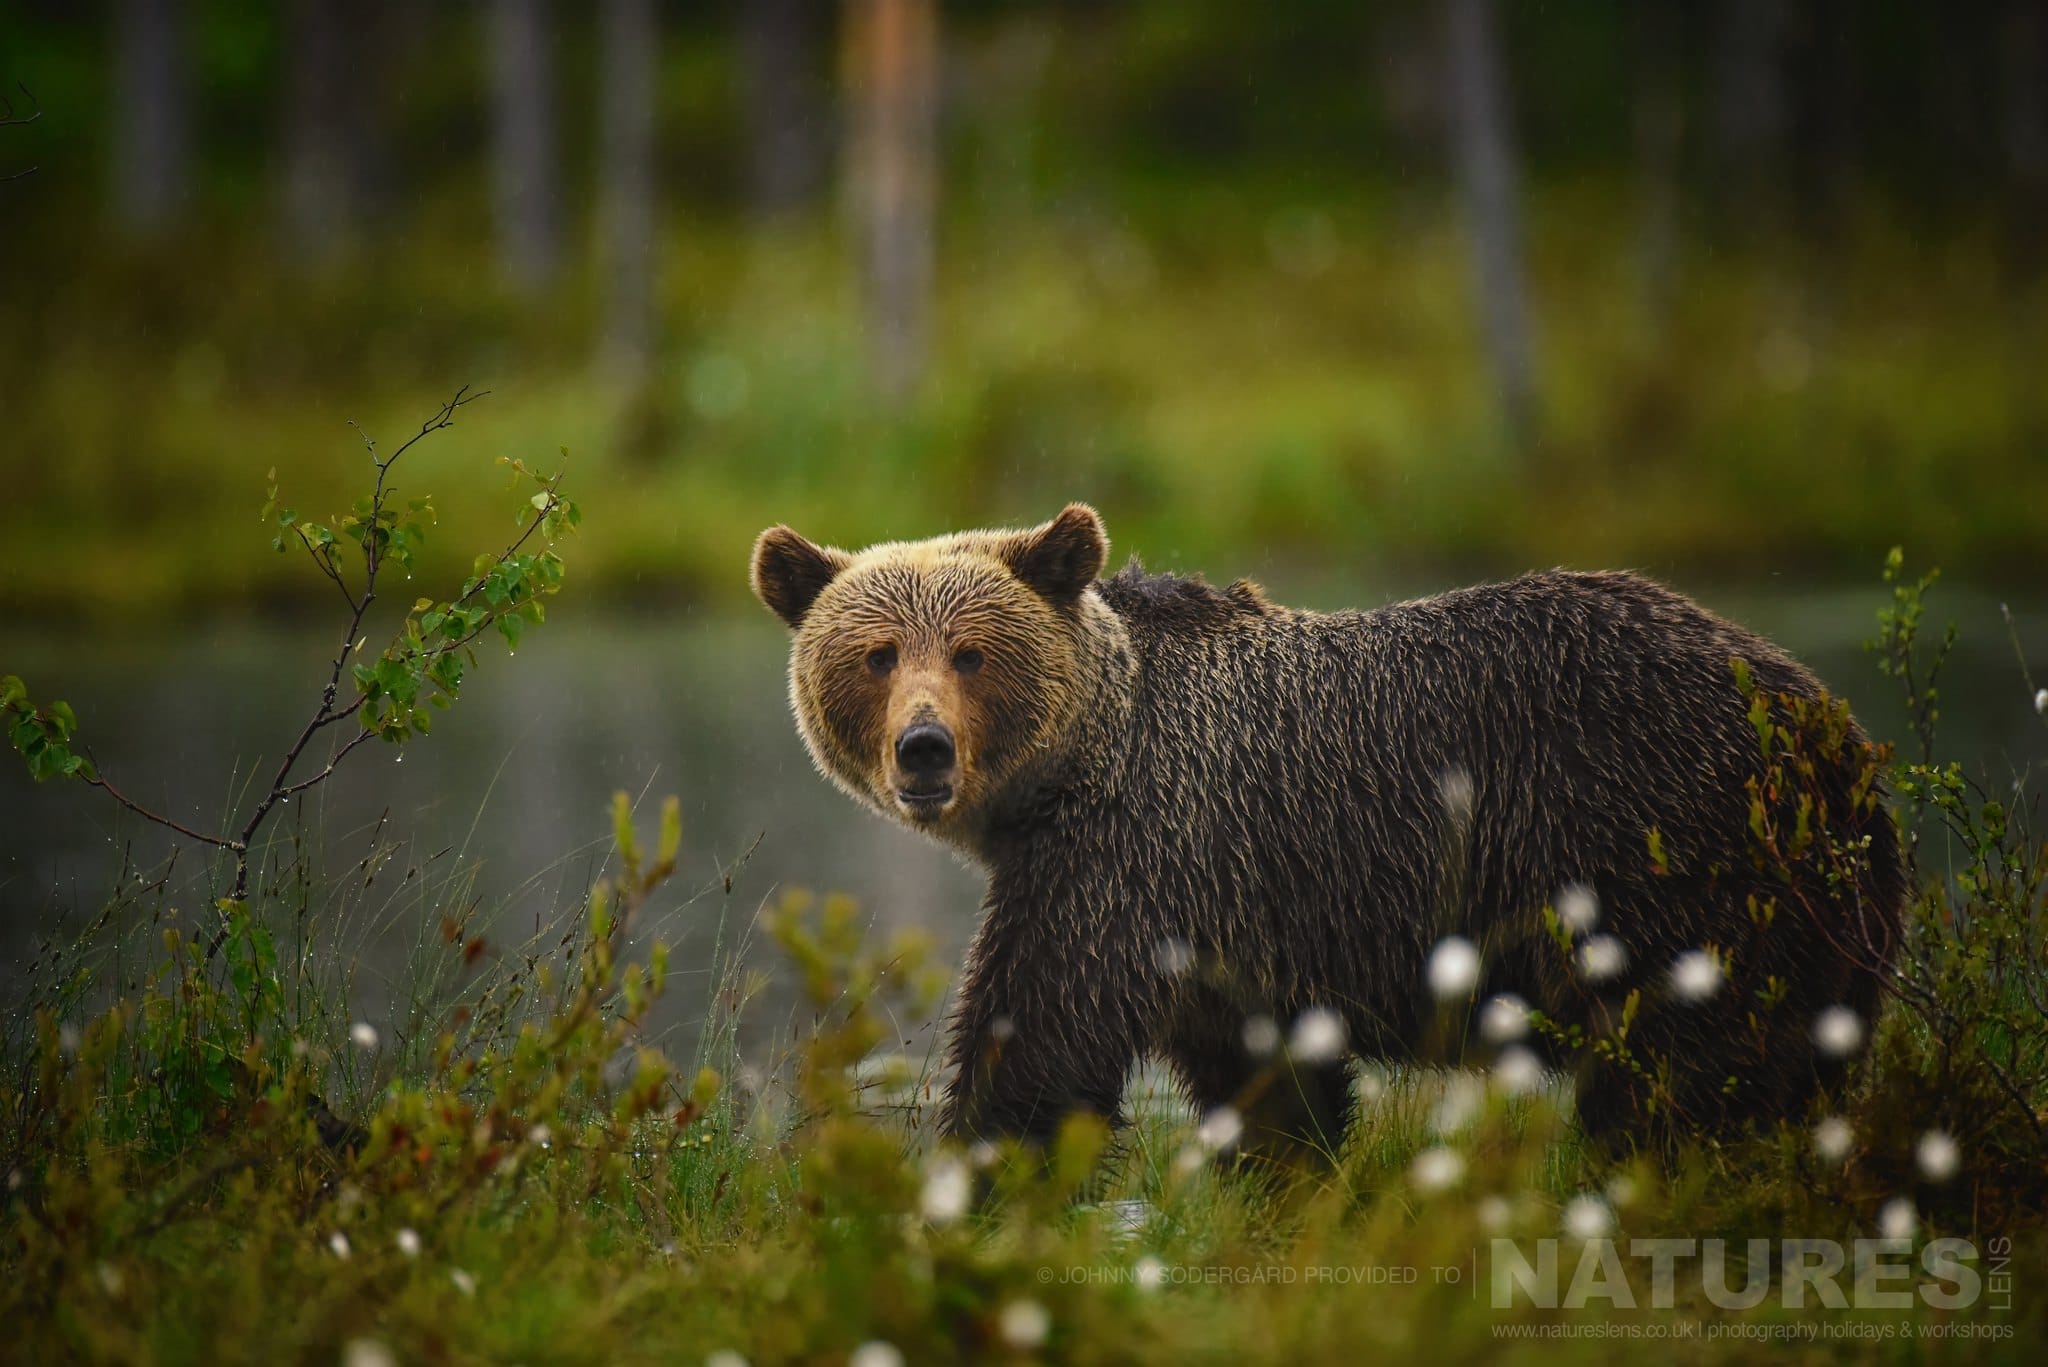 One Of The Large Wild Brown Bears Stares Directly At The Photography Hide Photographed By Johnny Södergård During The Natureslens Wild Brown Bears Of Finland Photography Holiday